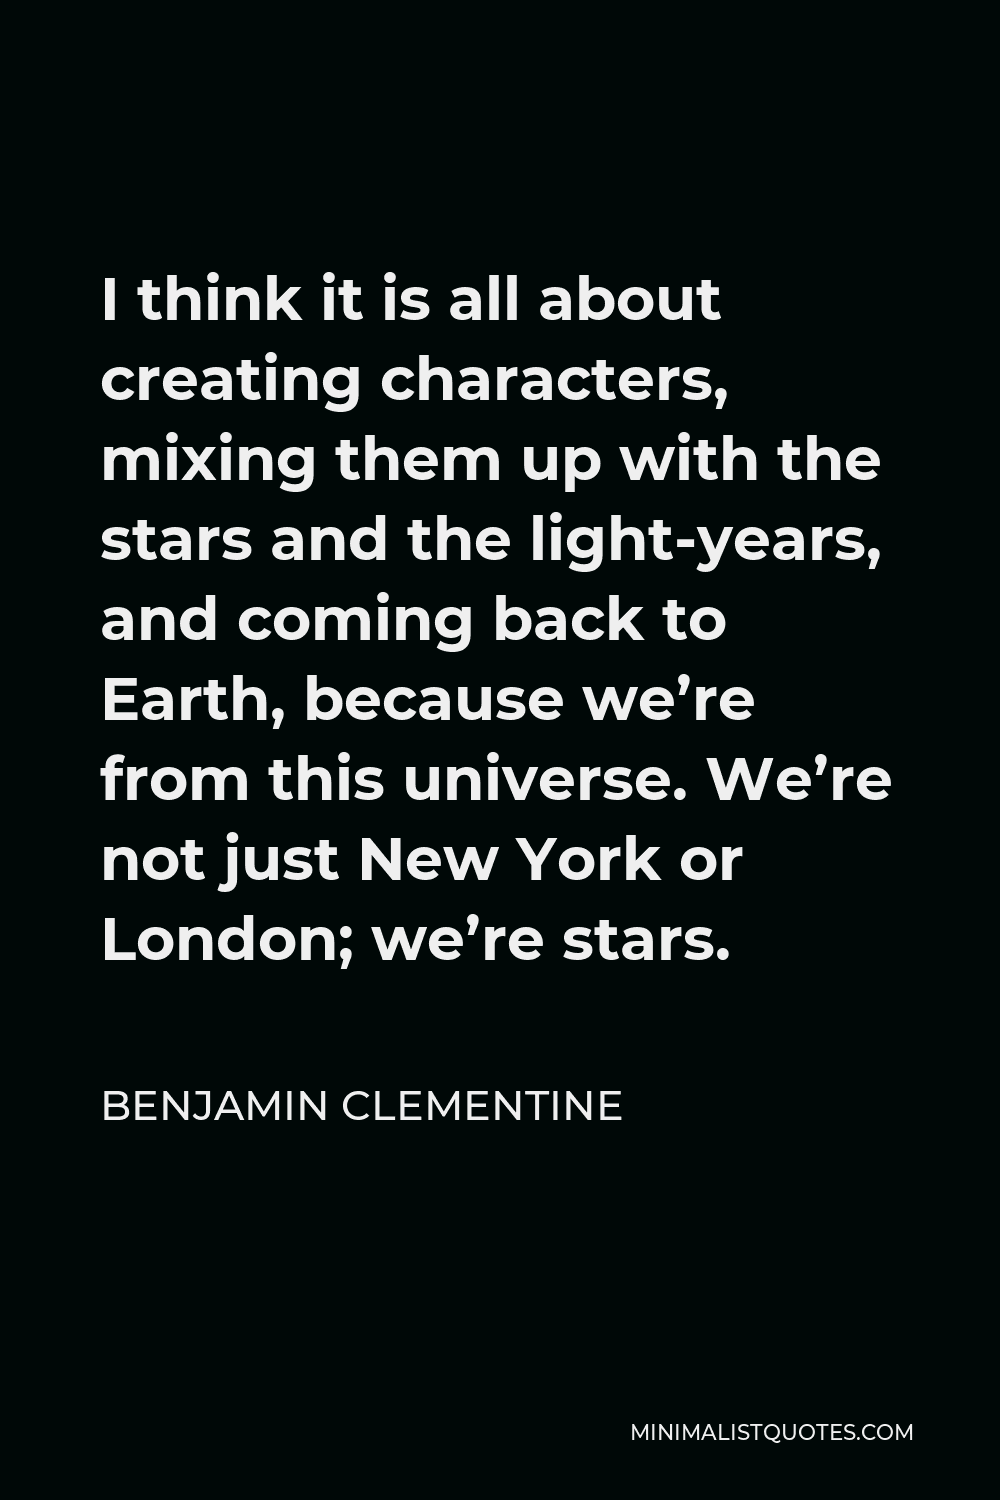 Benjamin Clementine Quote - I think it is all about creating characters, mixing them up with the stars and the light-years, and coming back to Earth, because we’re from this universe. We’re not just New York or London; we’re stars.